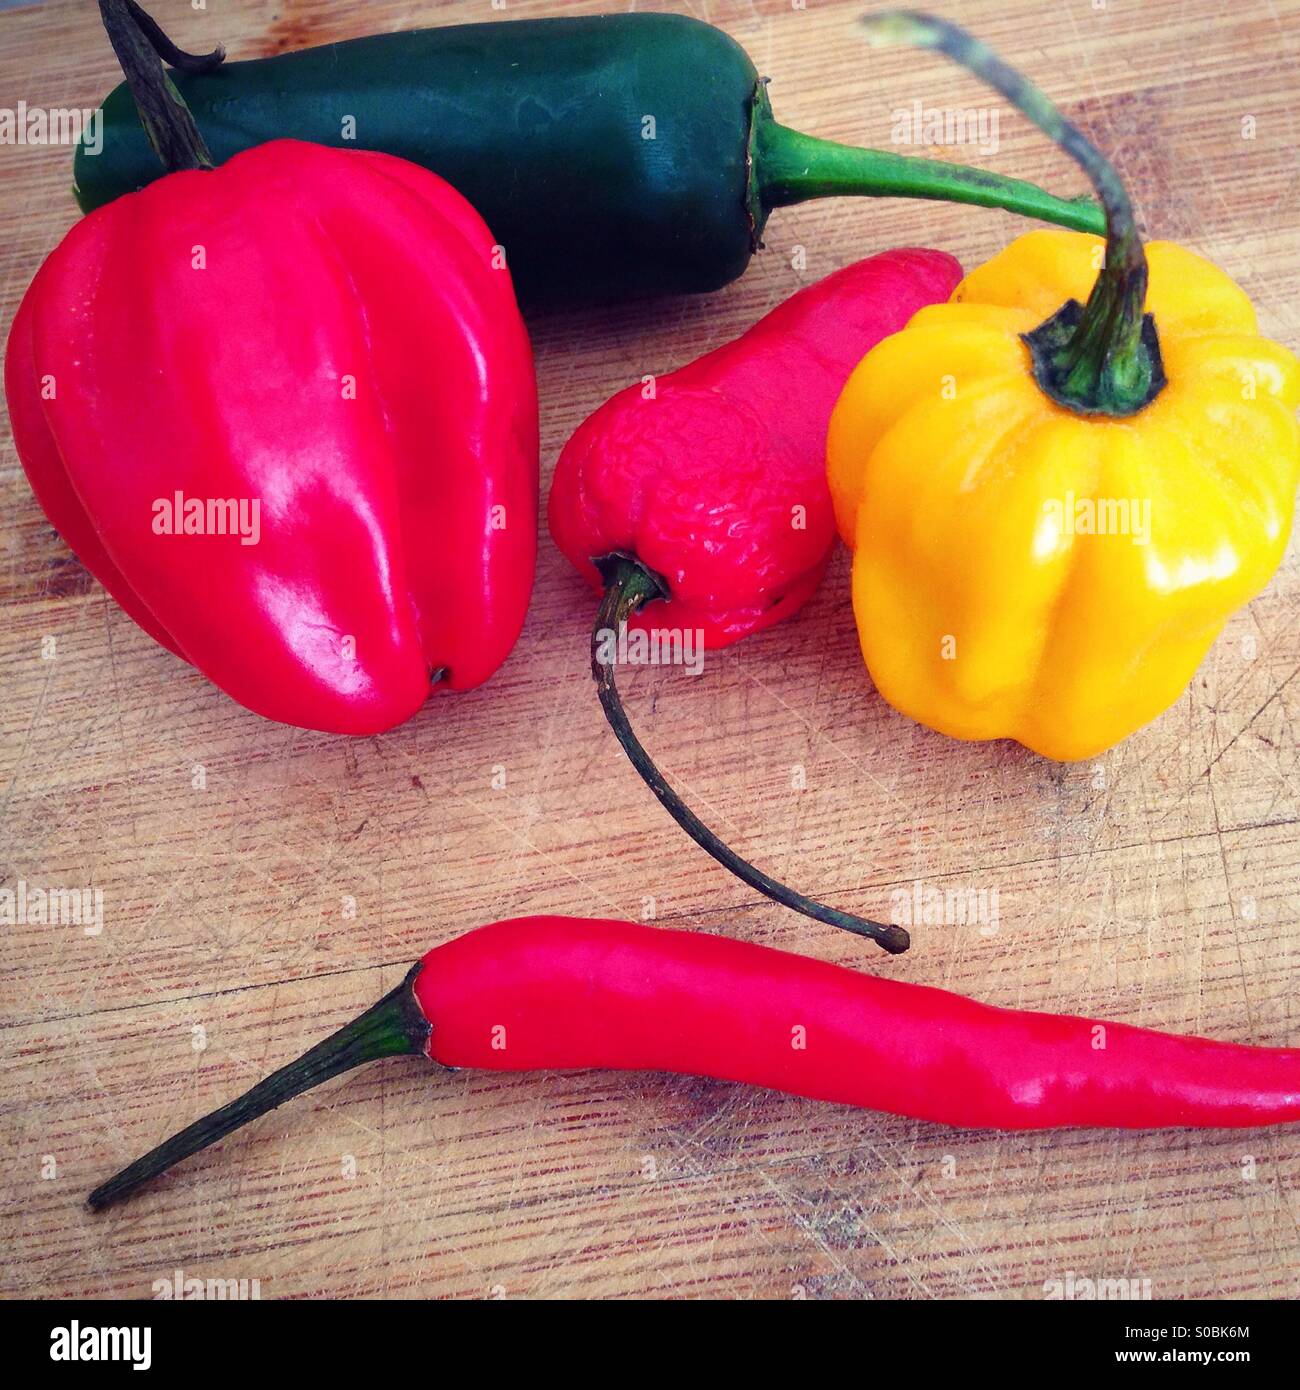 Colorful chili peppers on wooden board Stock Photo